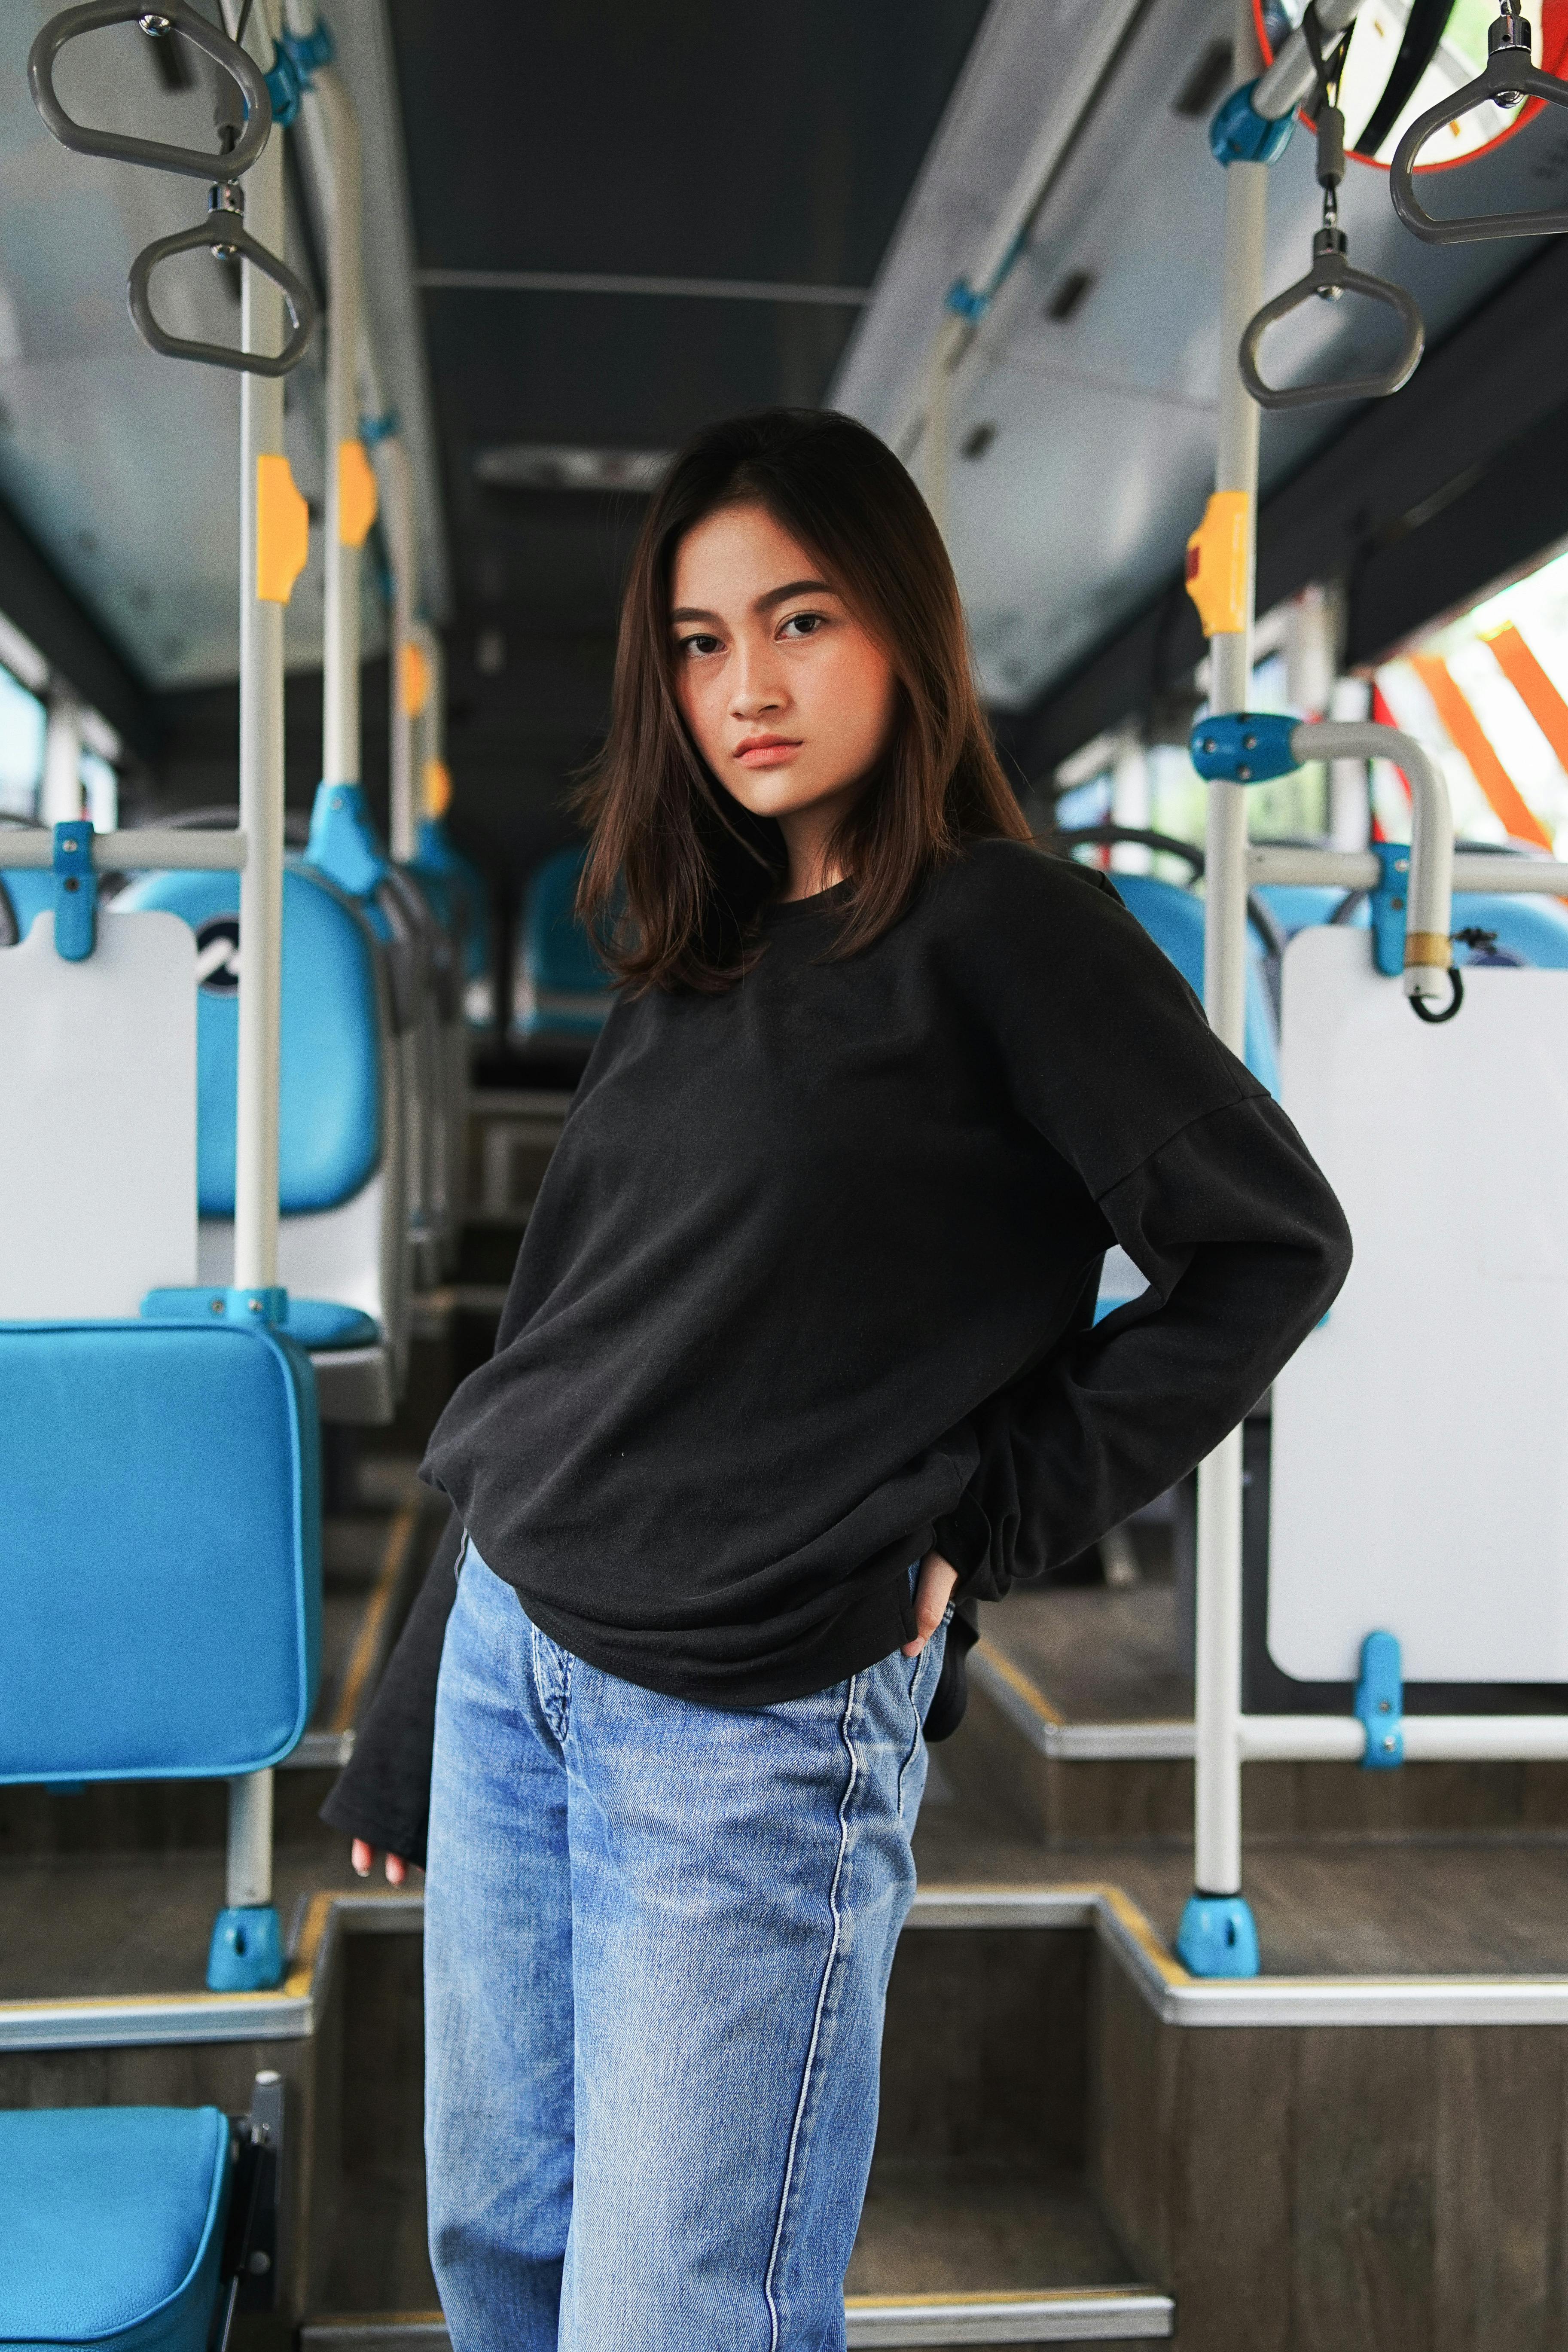 Integration Vie liv Woman in Black Sweater and Blue Jeans Standing Inside Vehicle · Free Stock  Photo